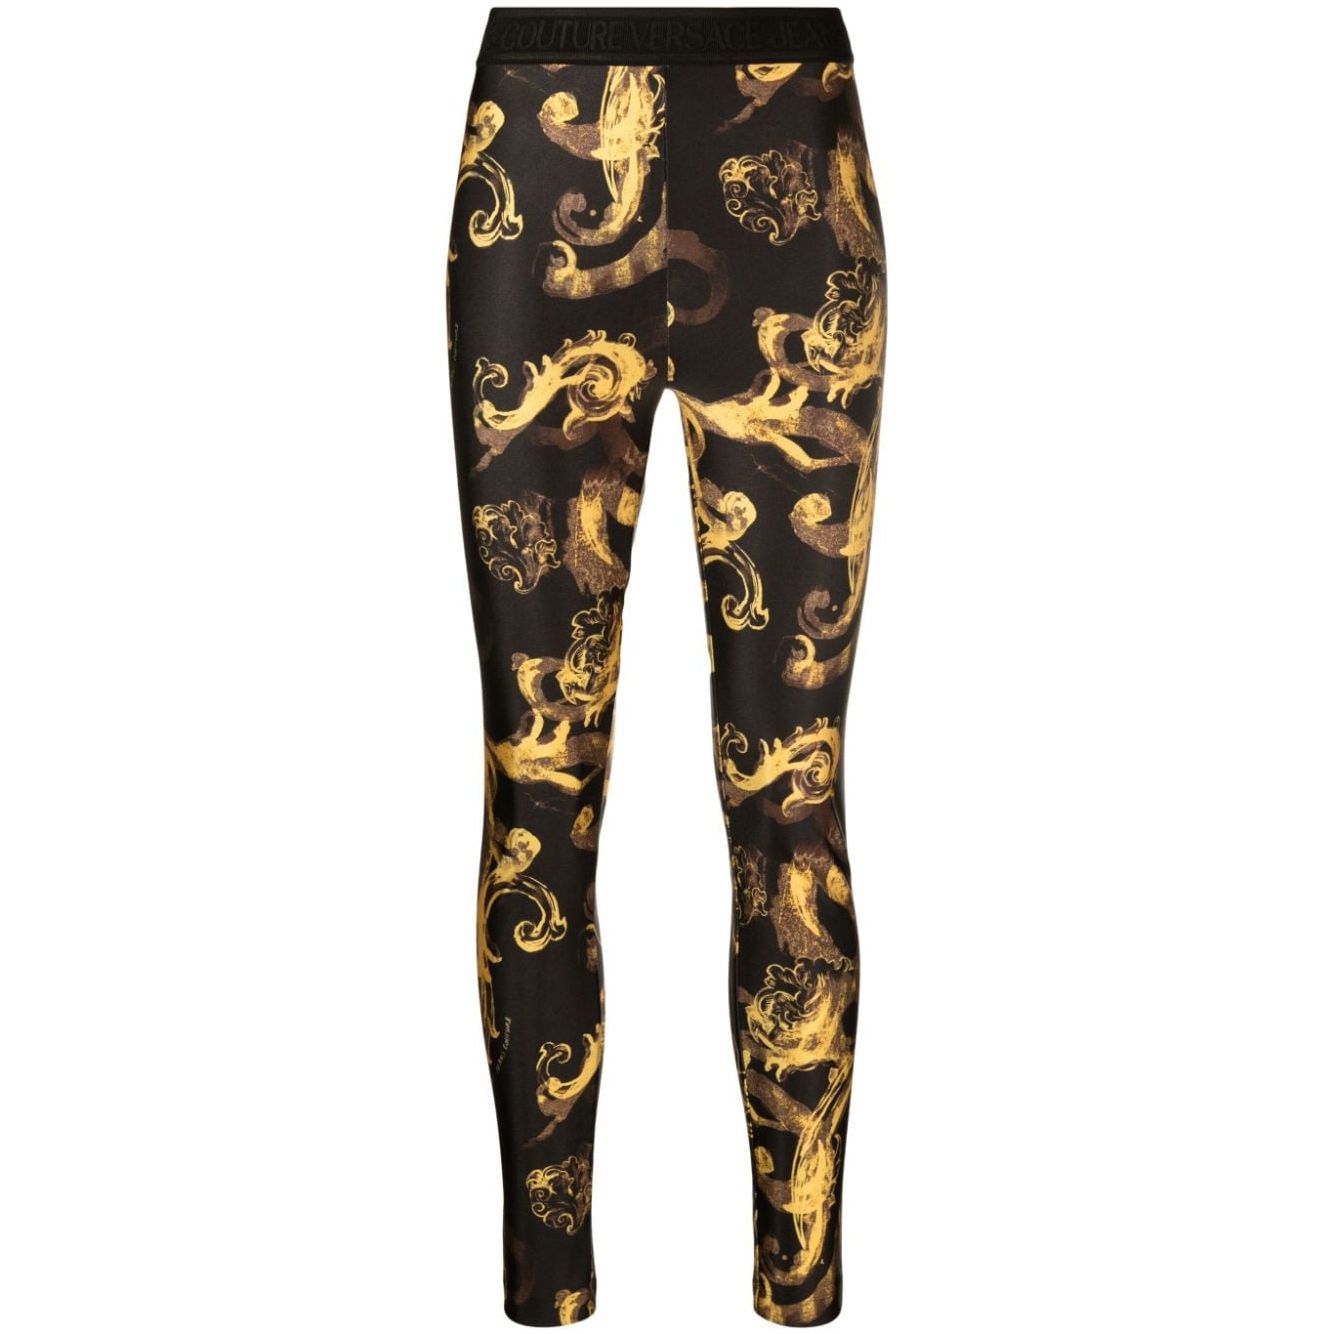 VERSACE JEANS COUTURE DAMASK LEGGINGS - Yooto